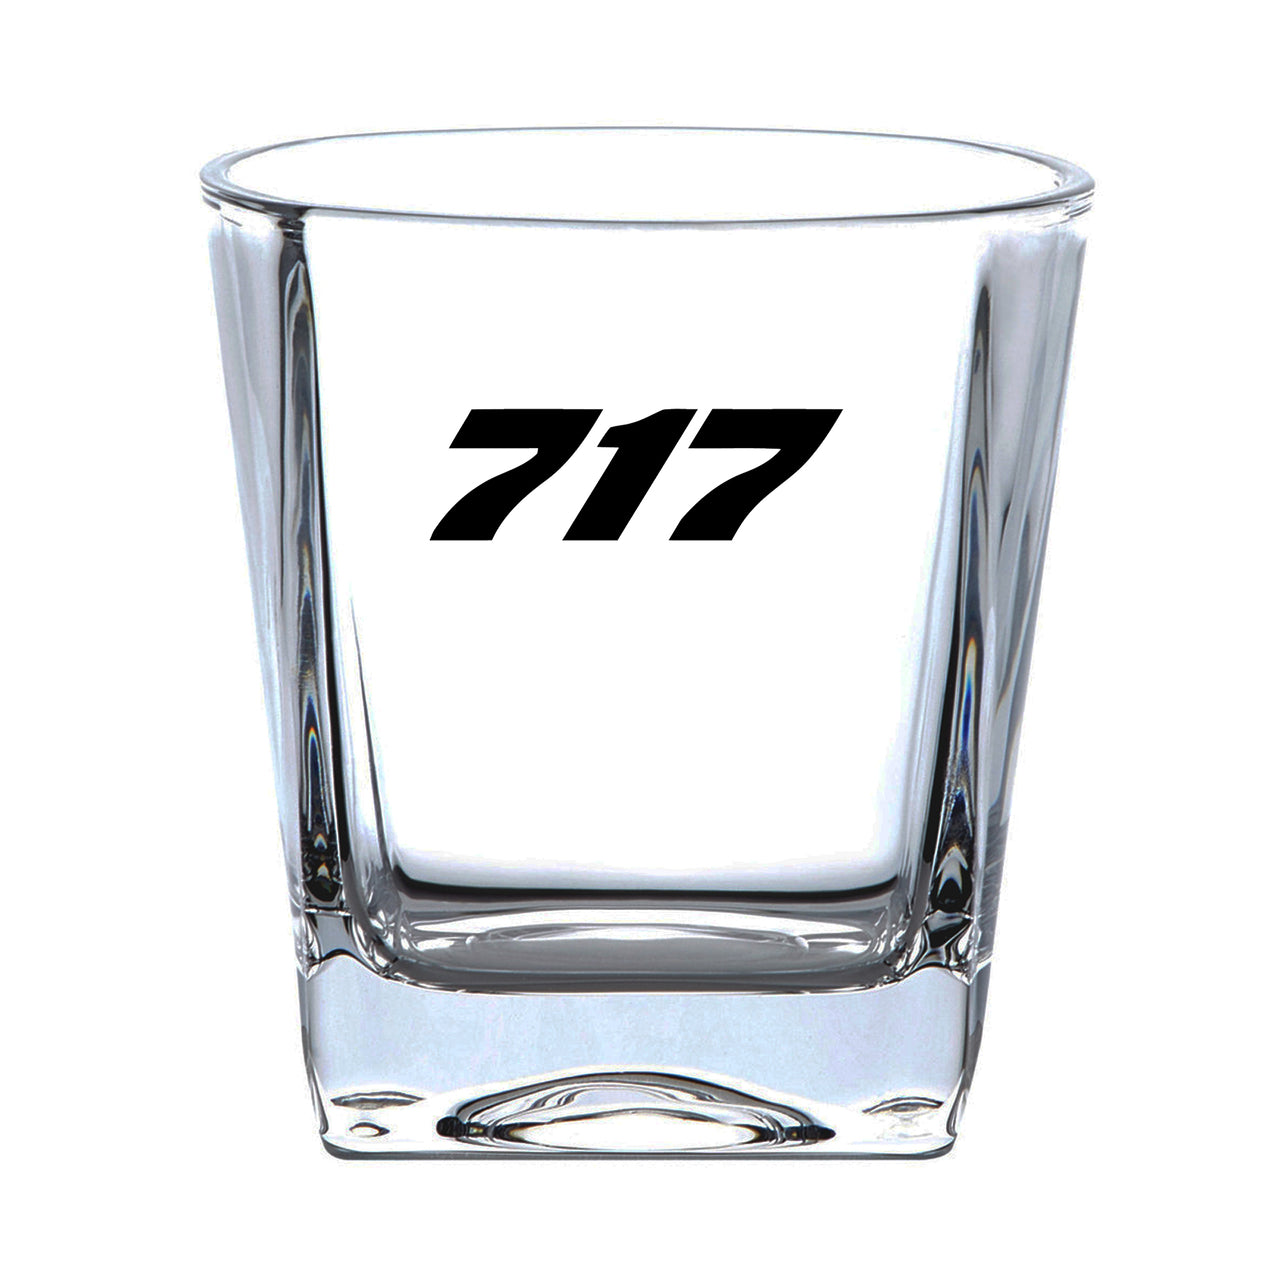 717 Flat Text Designed Whiskey Glass